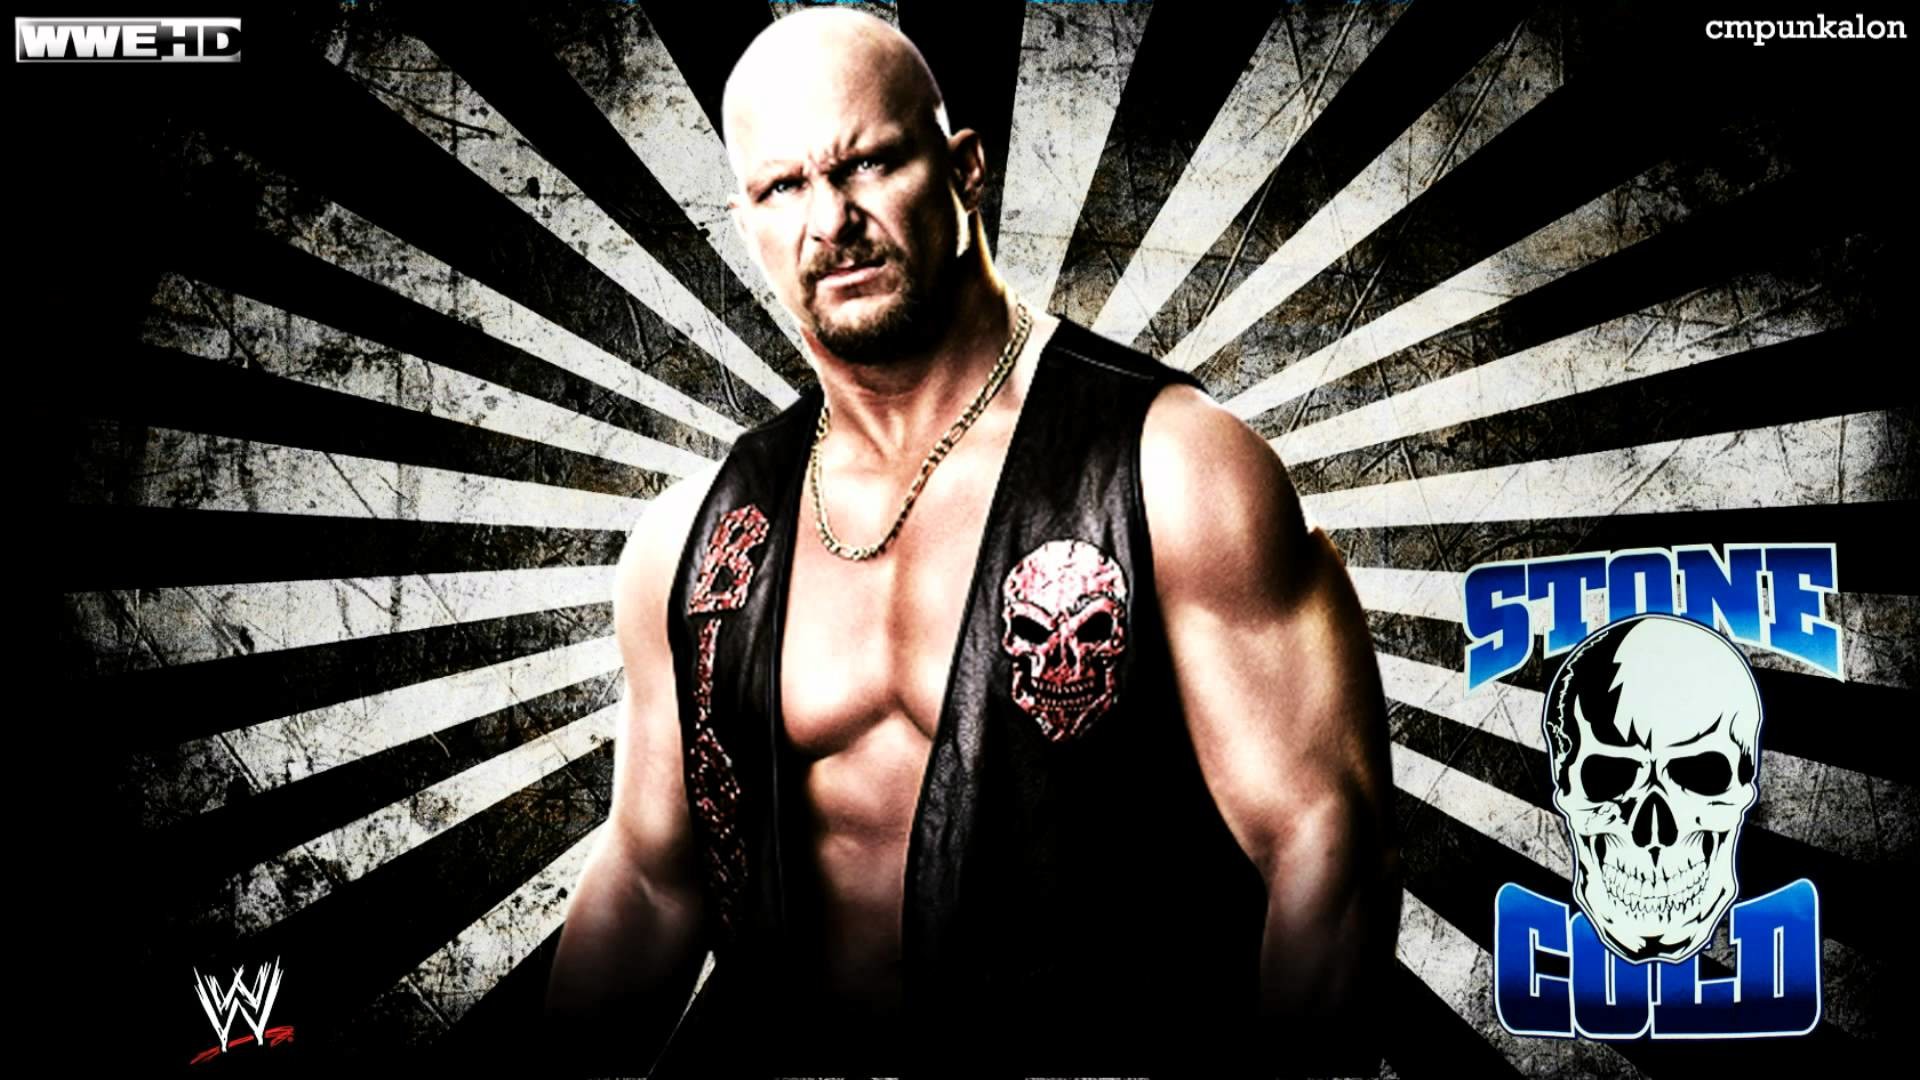 1920x1080 Wallpapers For > Wwe Wallpapers Hd 2014